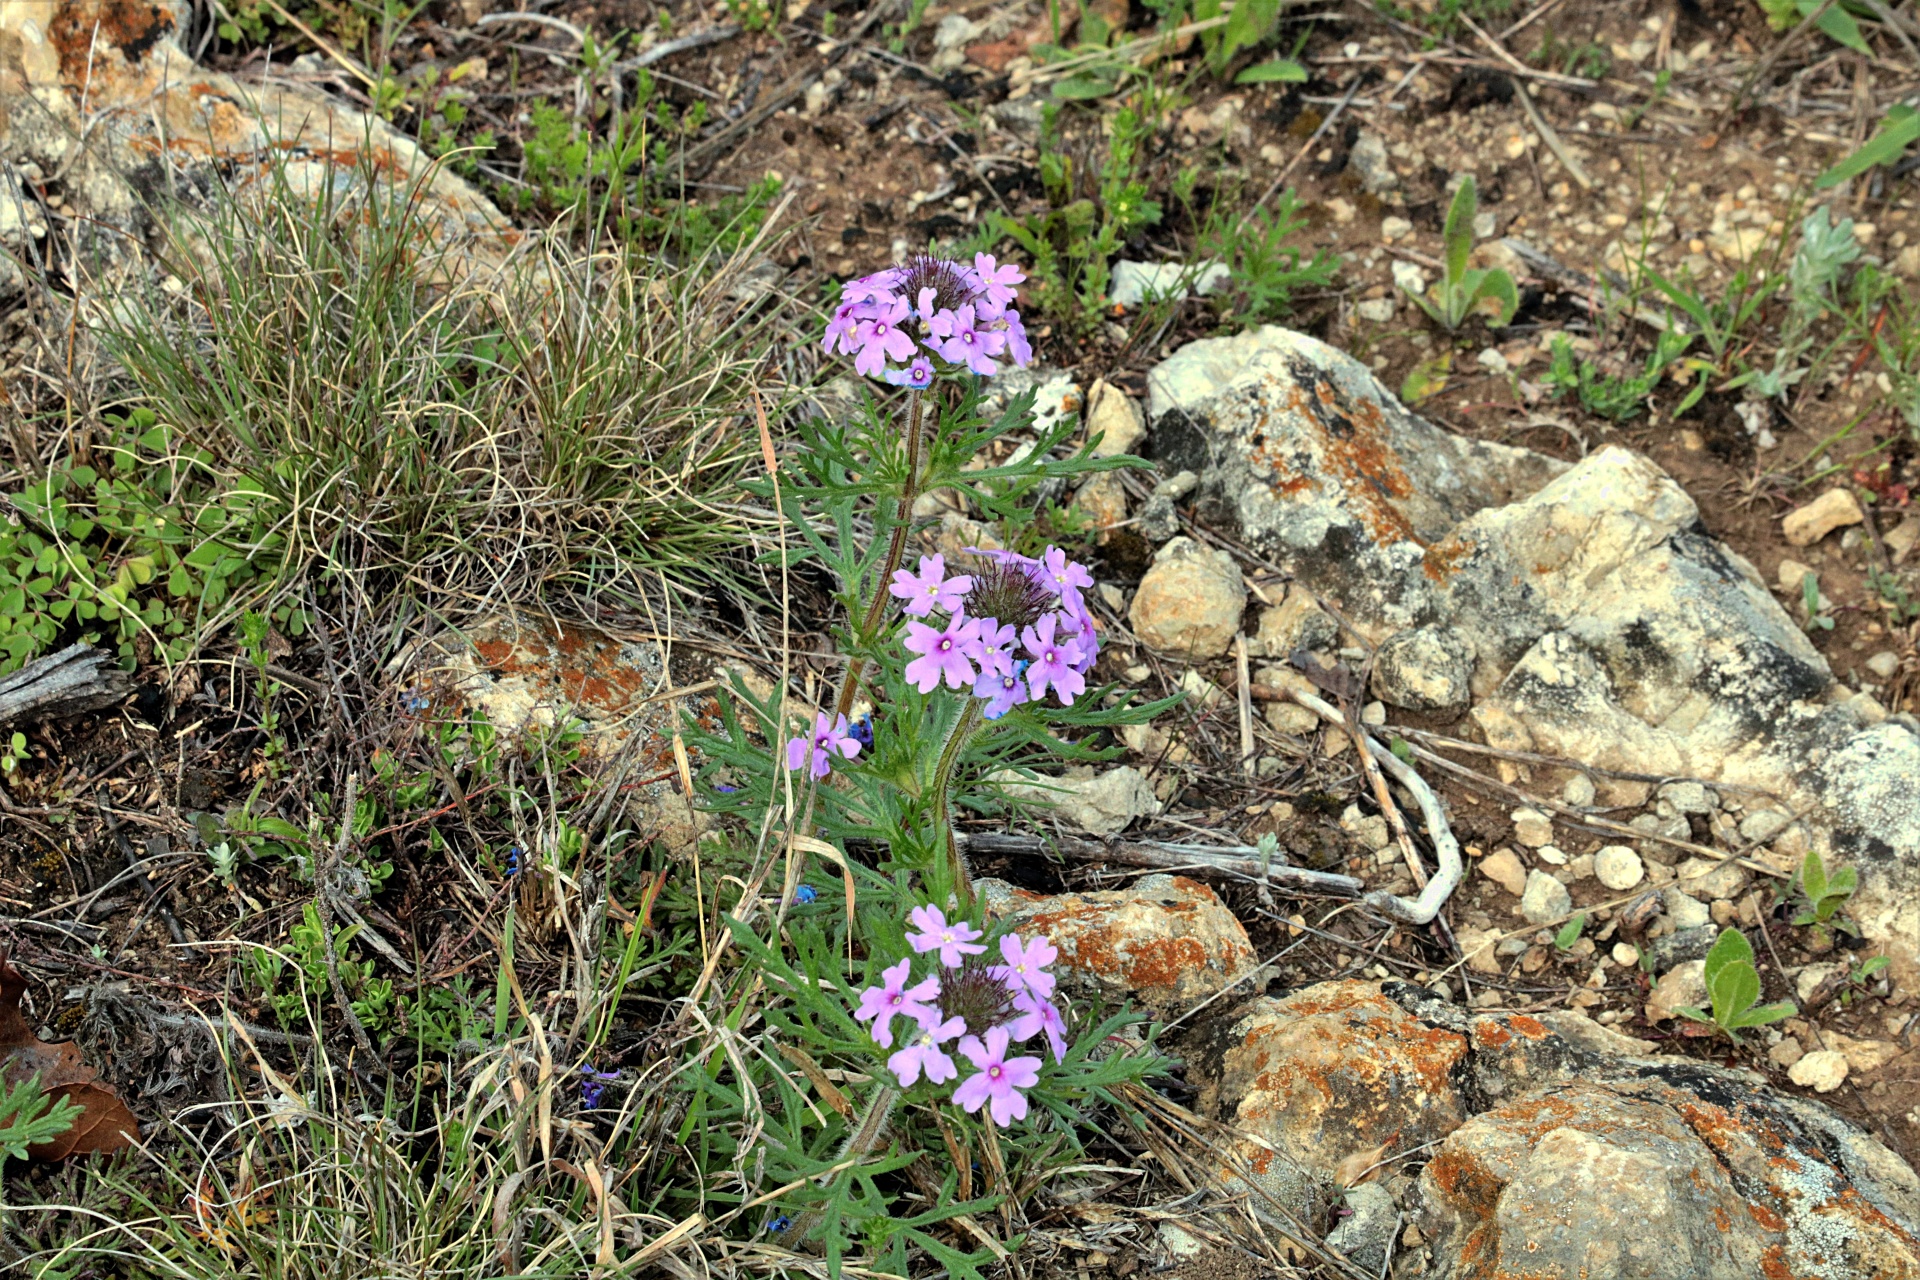 A groups of light purple rose verbena wildflowers growing among wild grass and colorful rocks in a spring country field.